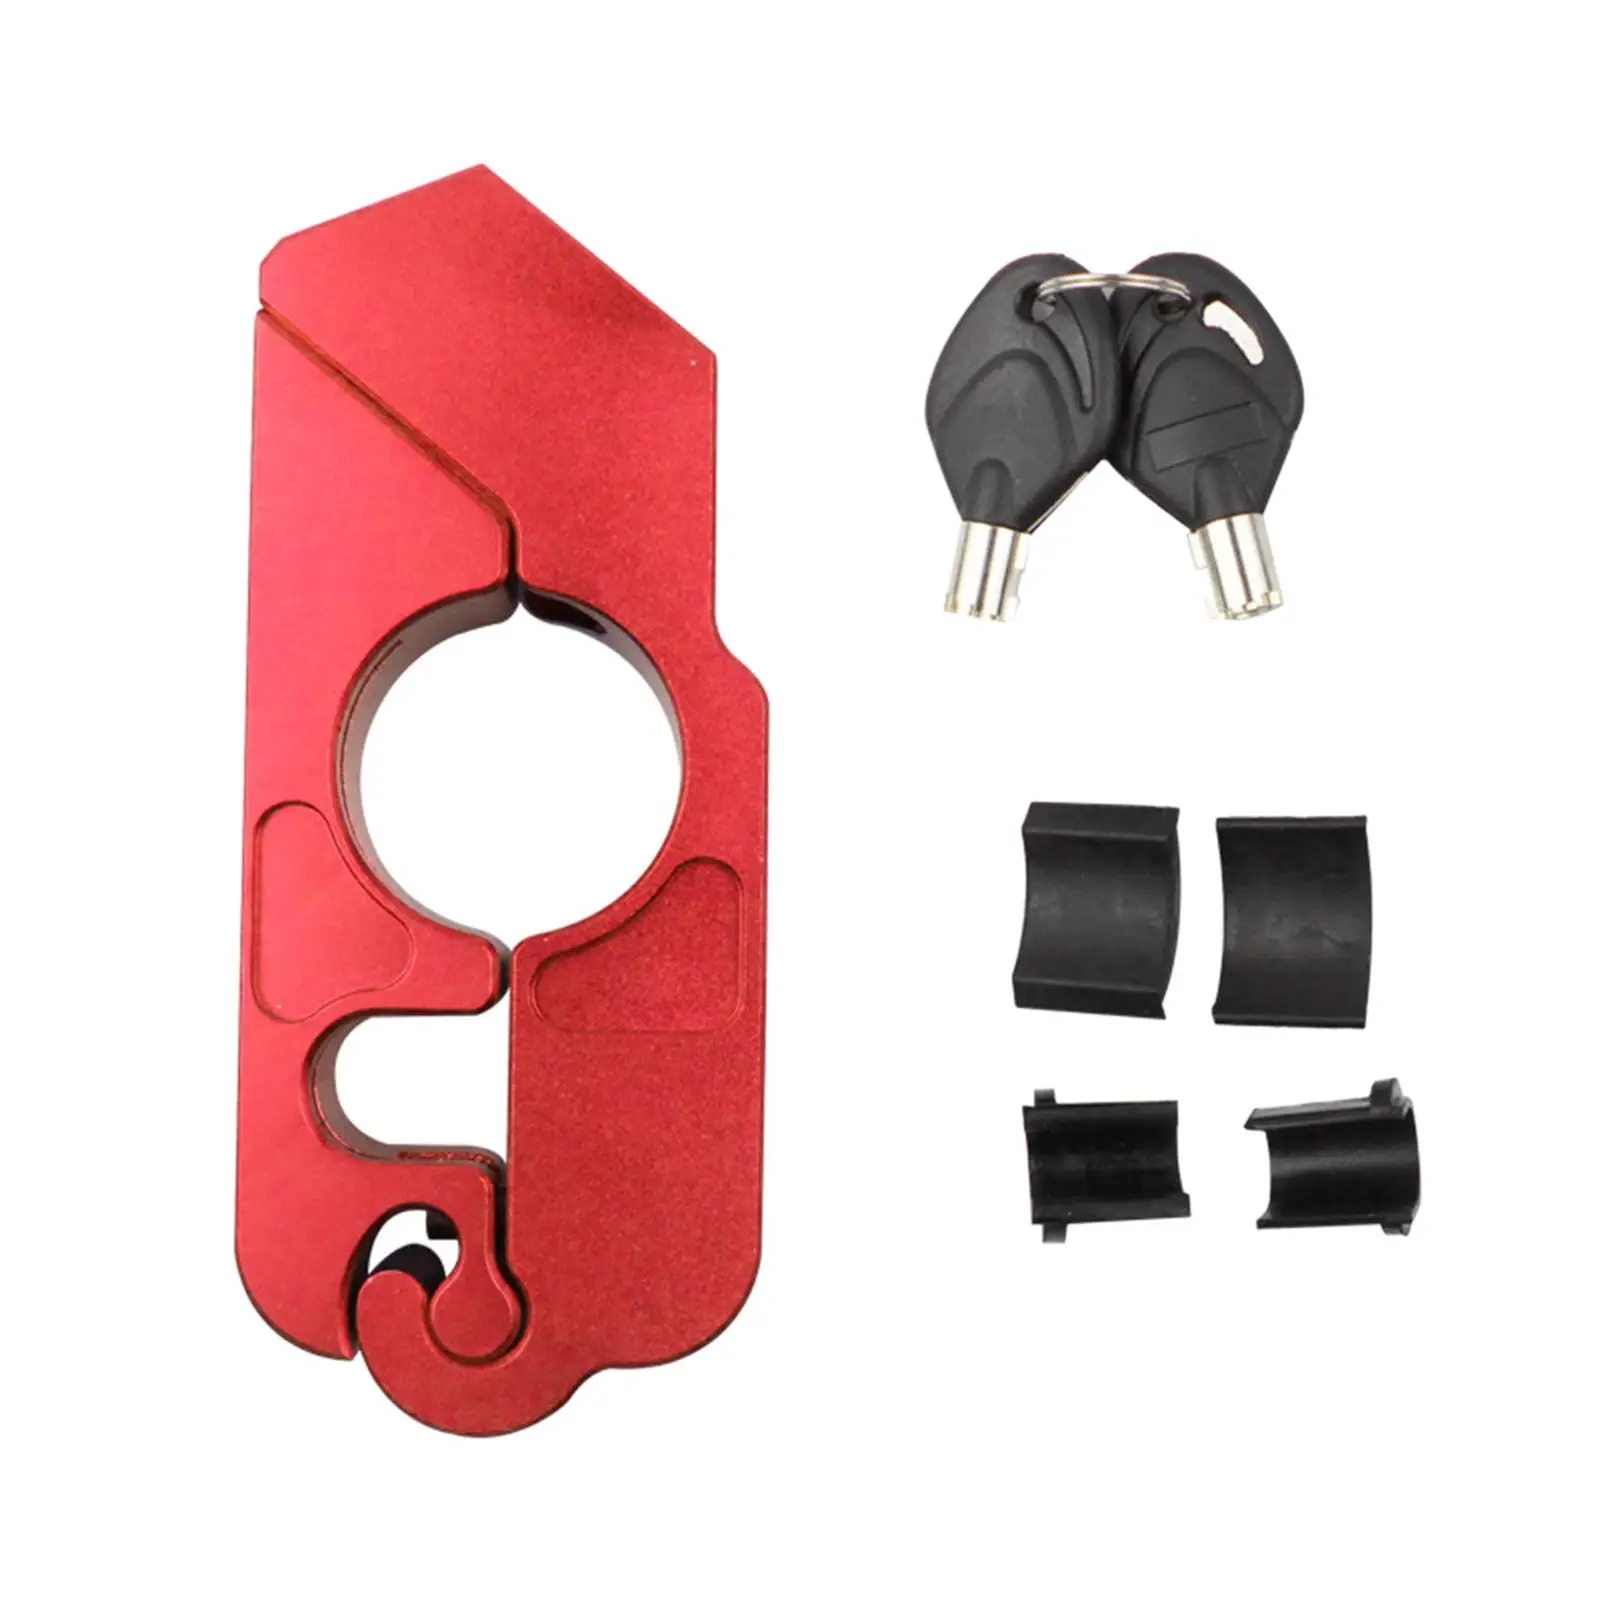 Duty Motorcycle Lock Throttle Lock for protection Secure Your Motorcycle